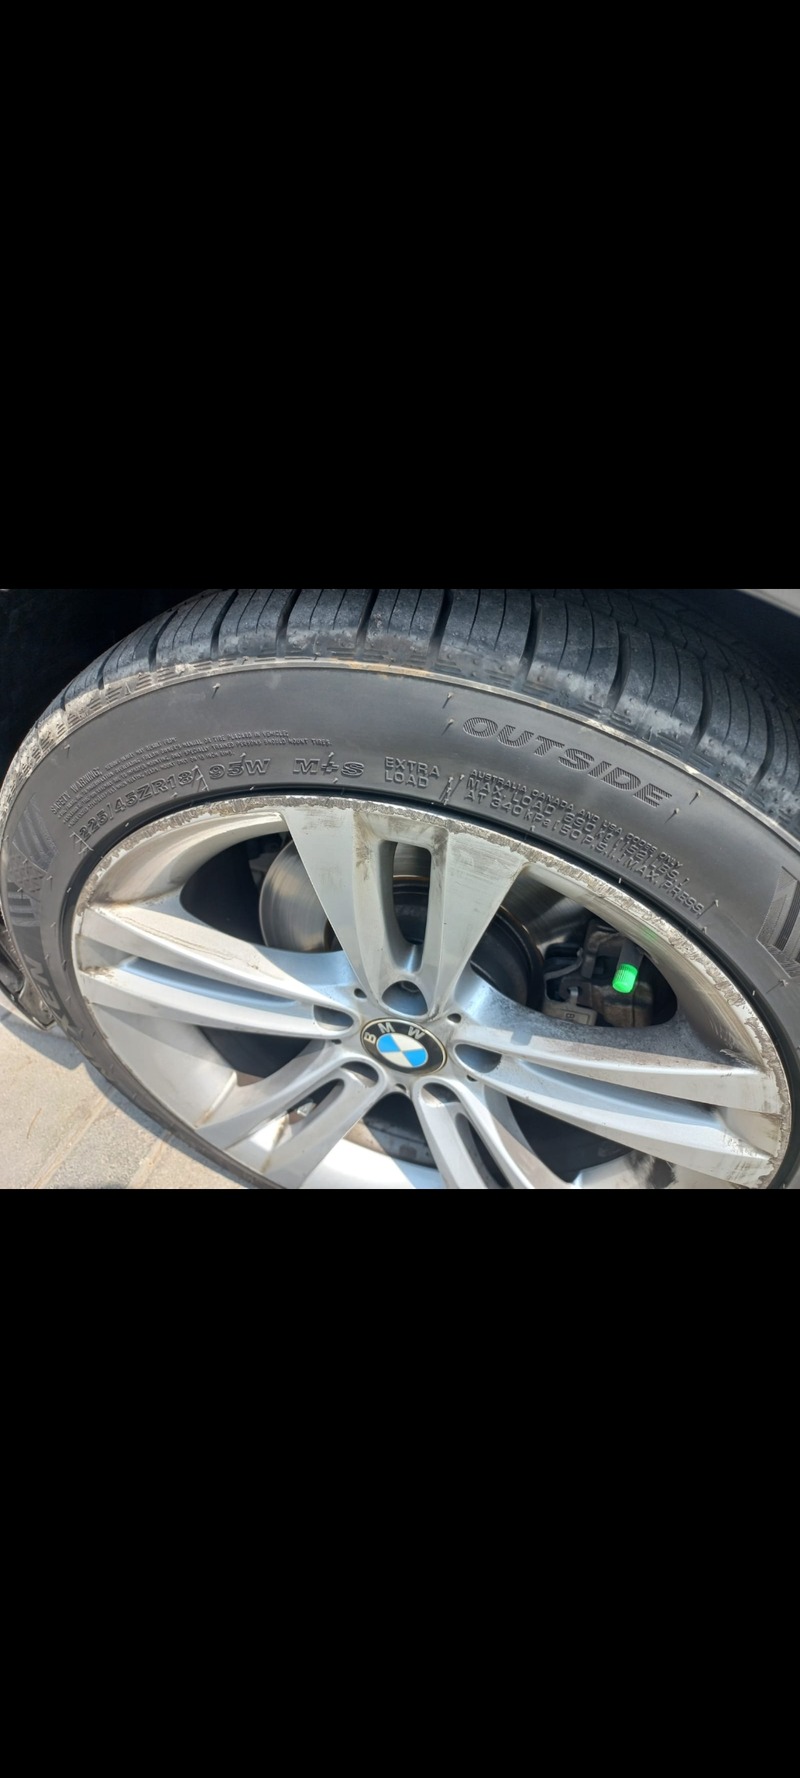 Used 2015 BMW 328 for sale in Dubai